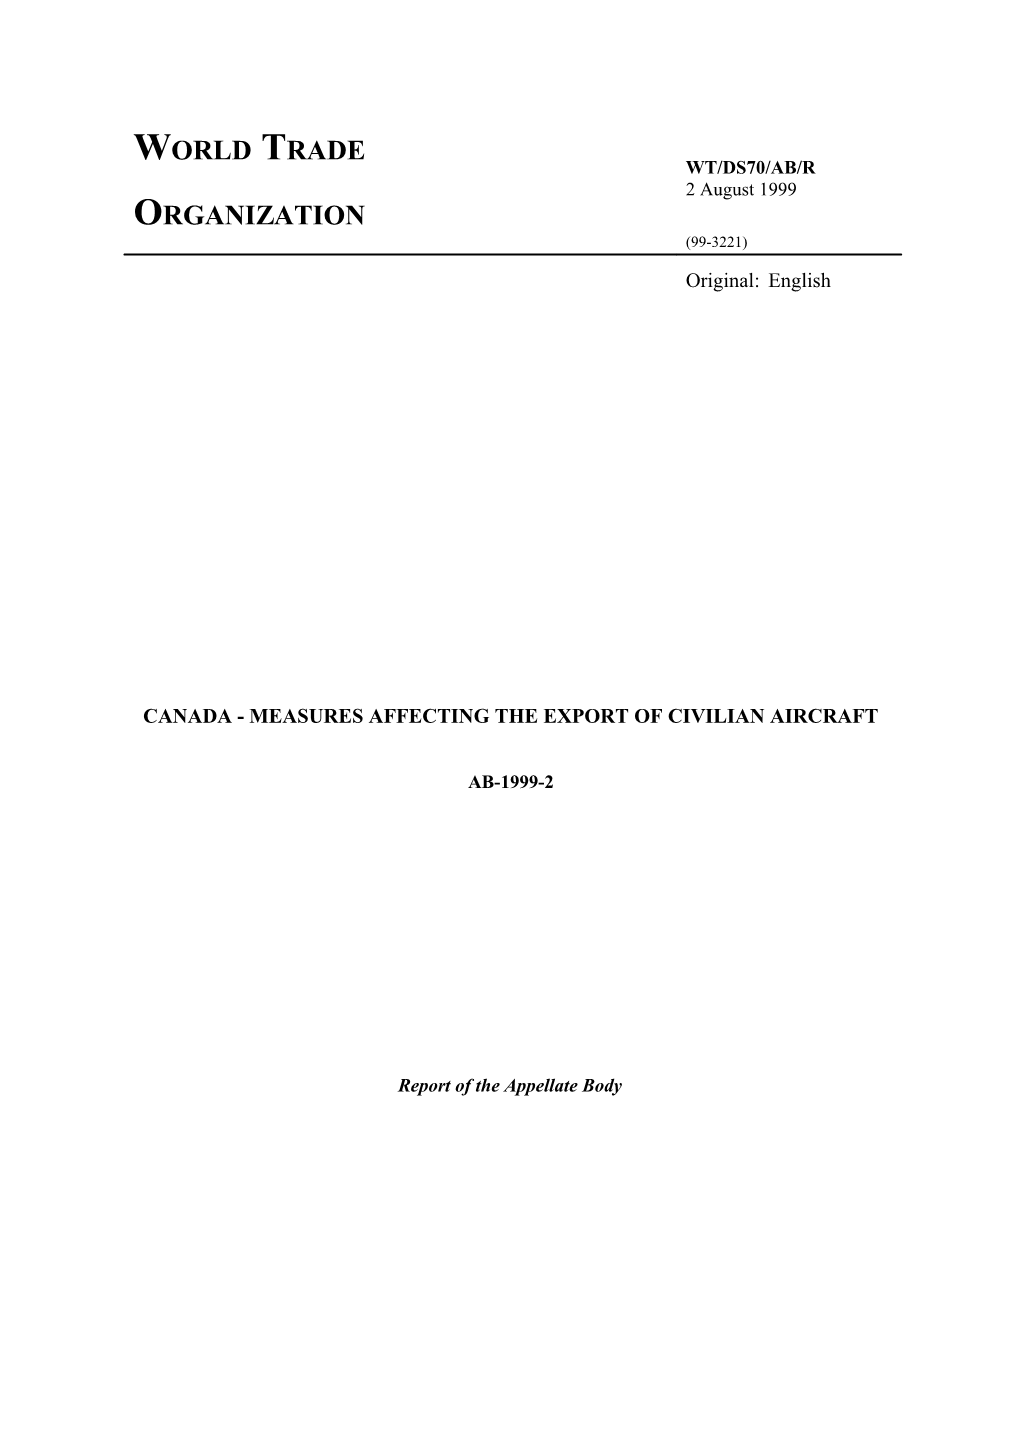 Canada - Measures Affecting the Export of Civilian Aircraft